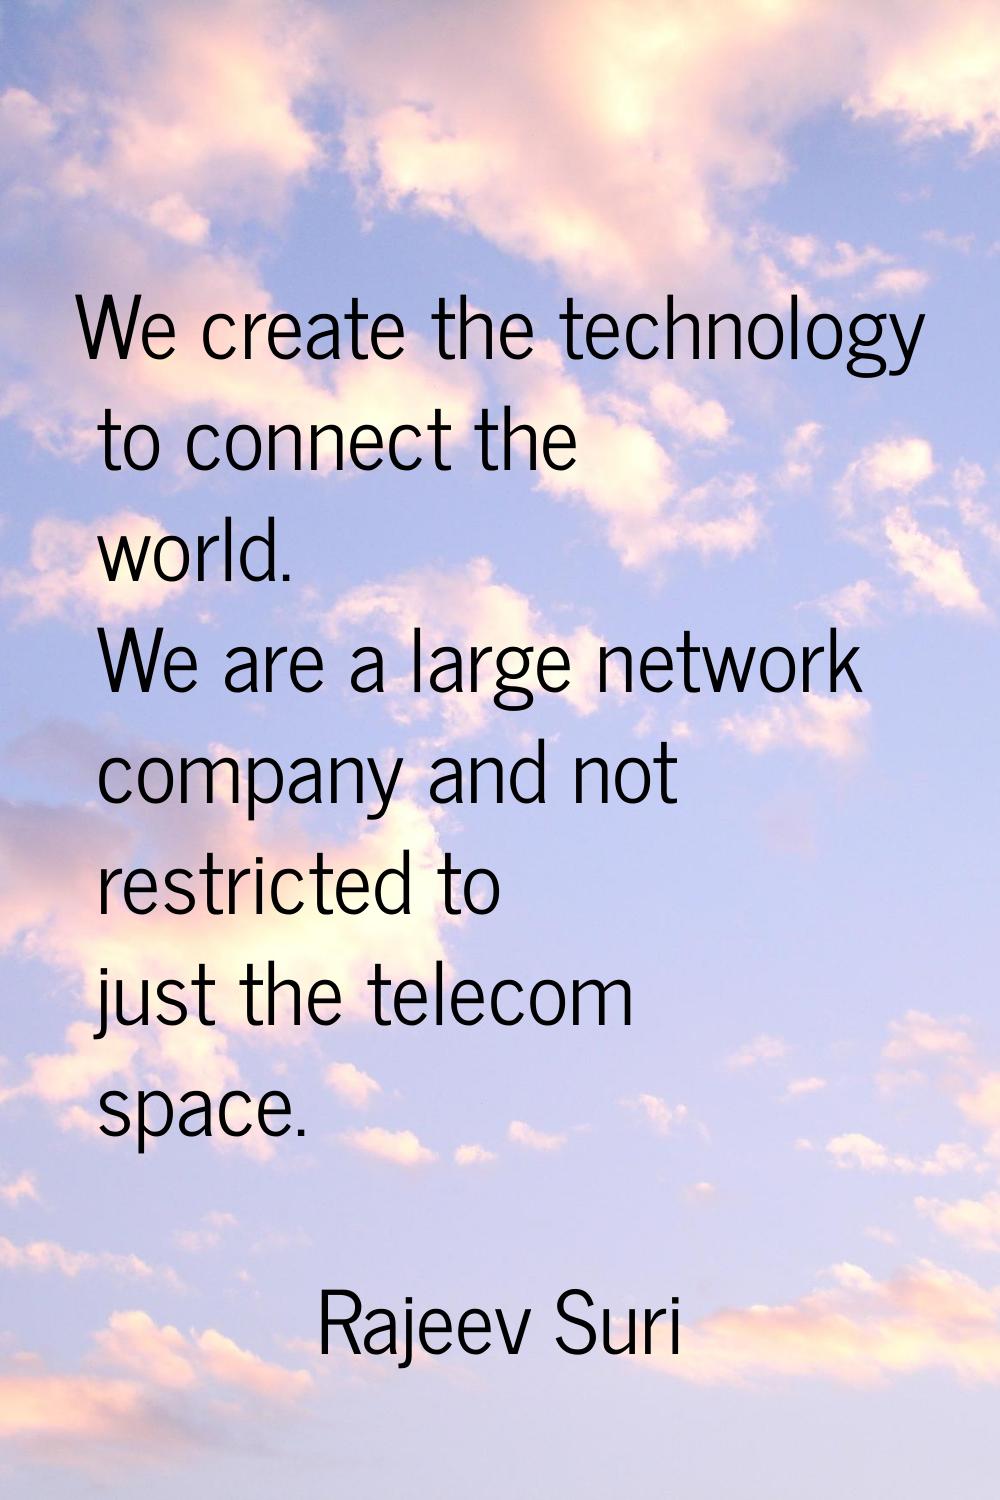 We create the technology to connect the world. We are a large network company and not restricted to